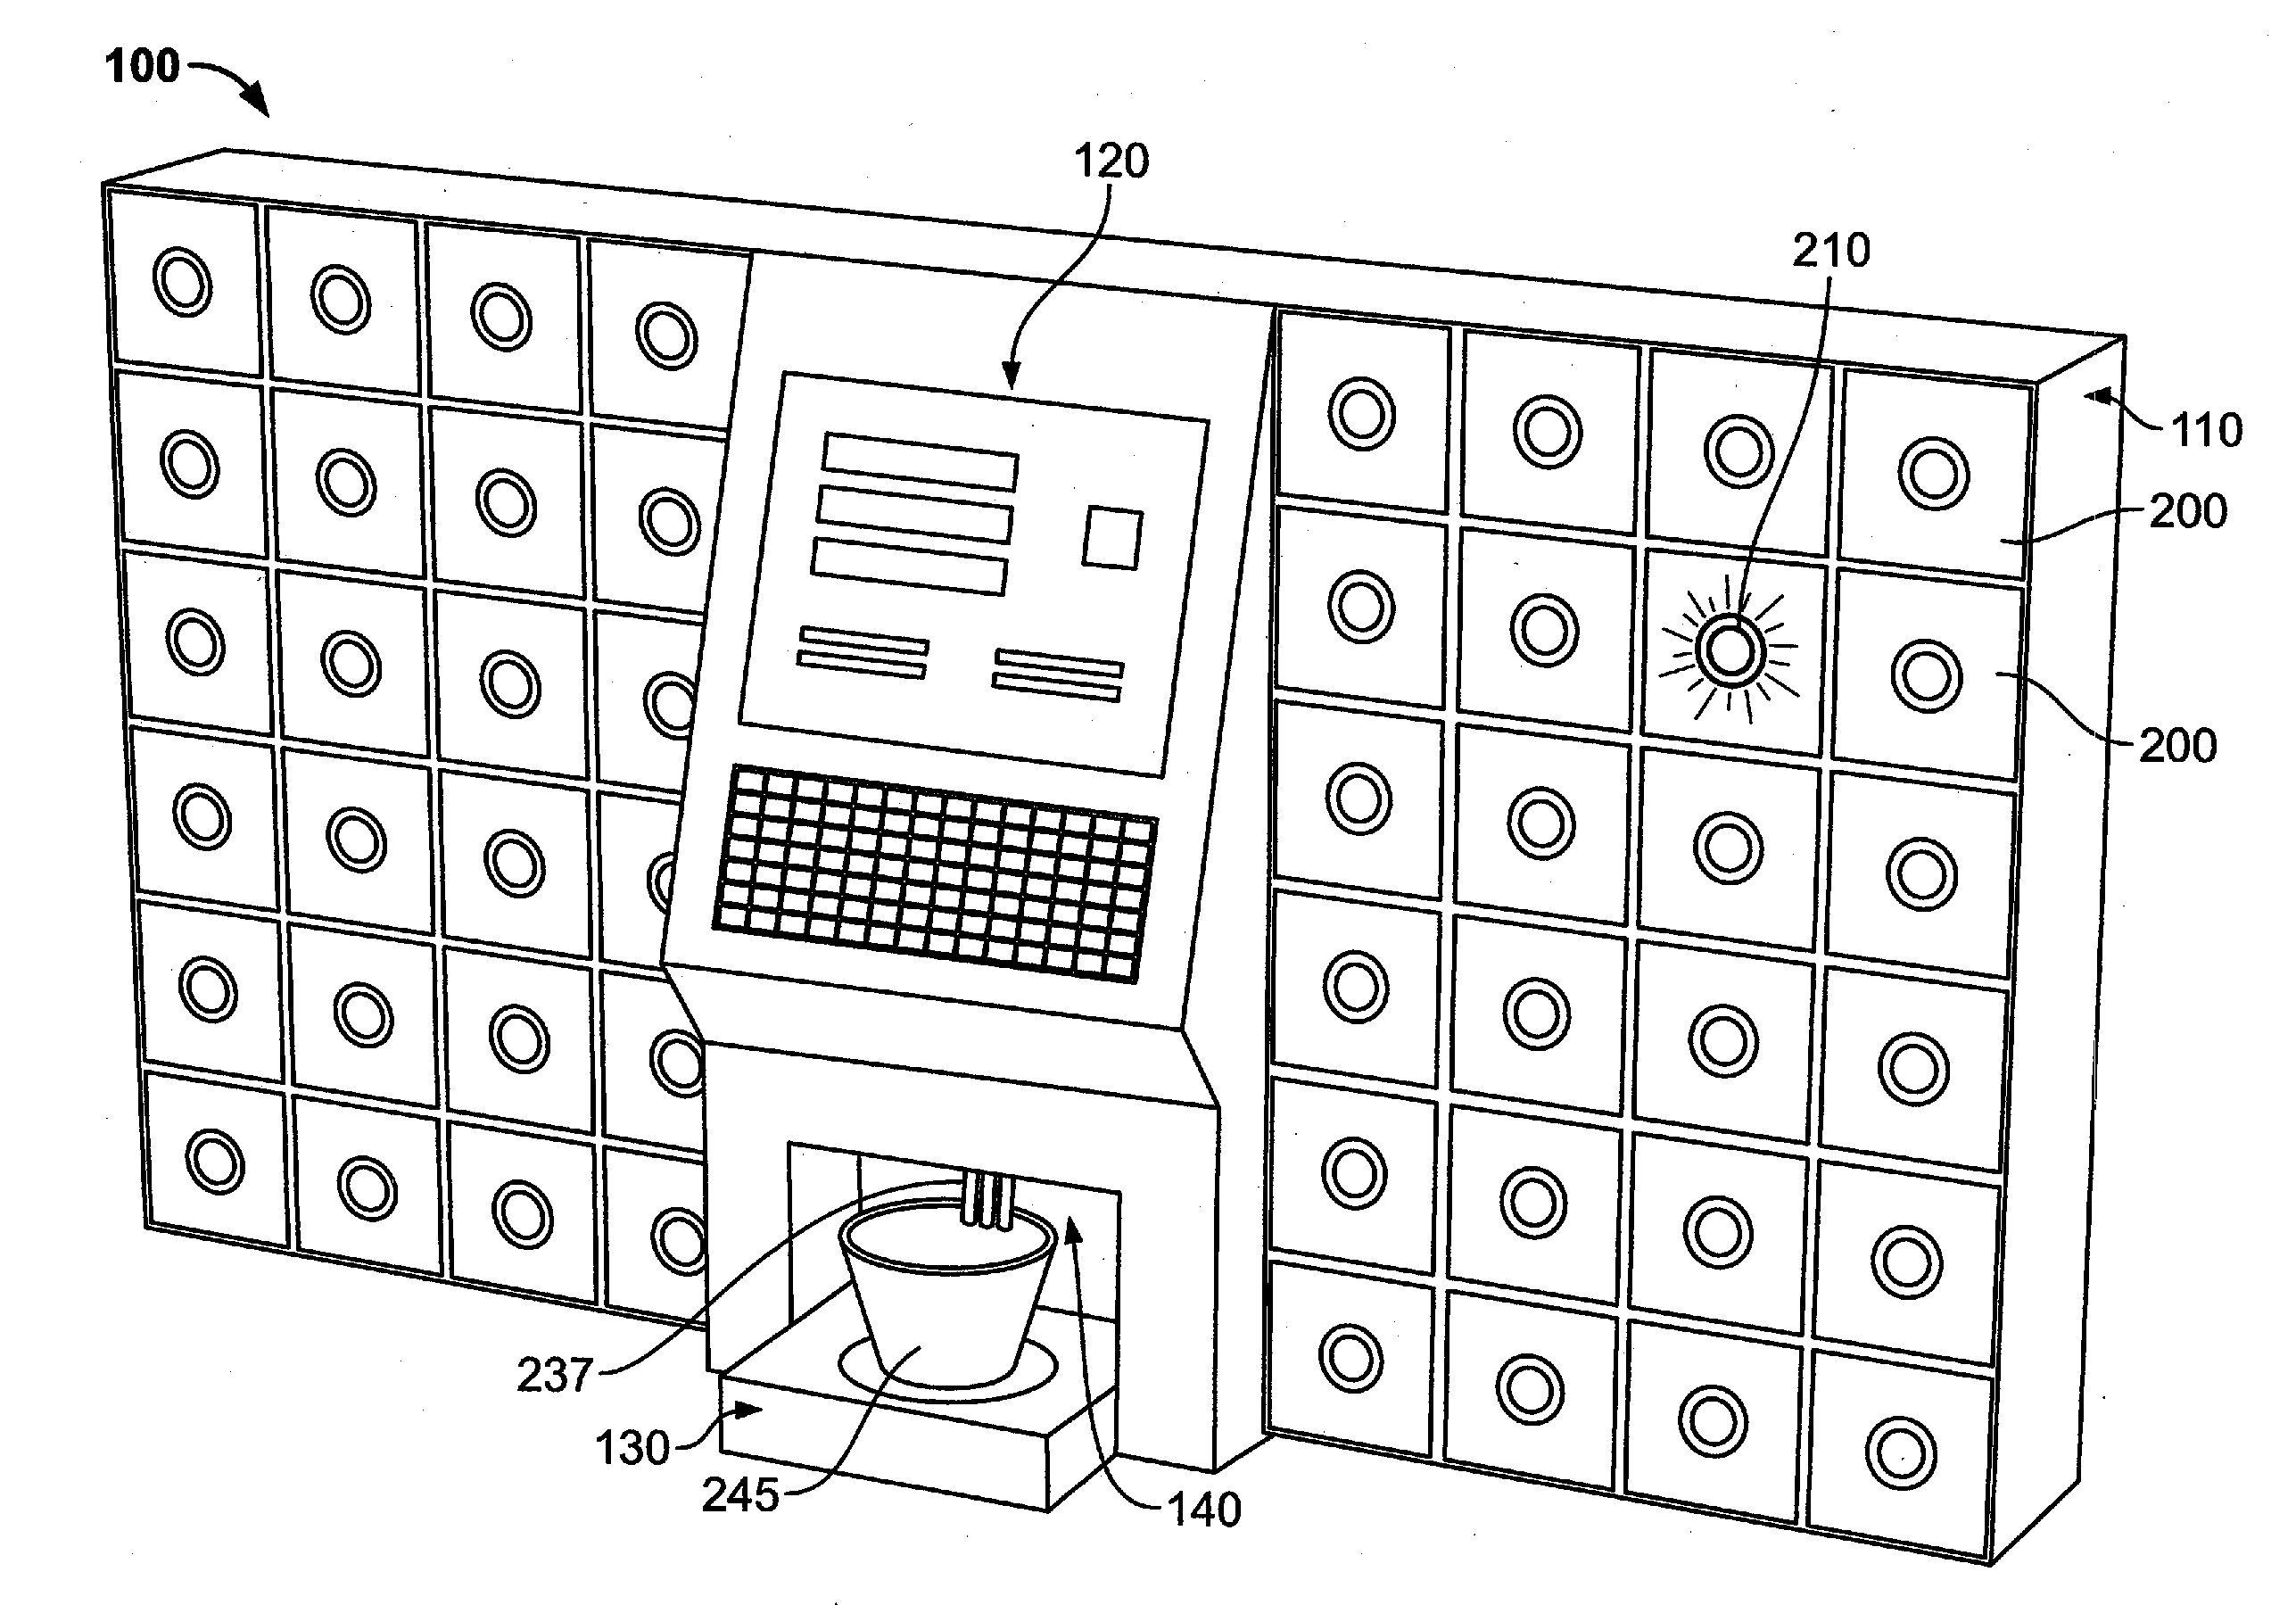 Manual Hair Dye Apparatus and Method for Using the Same